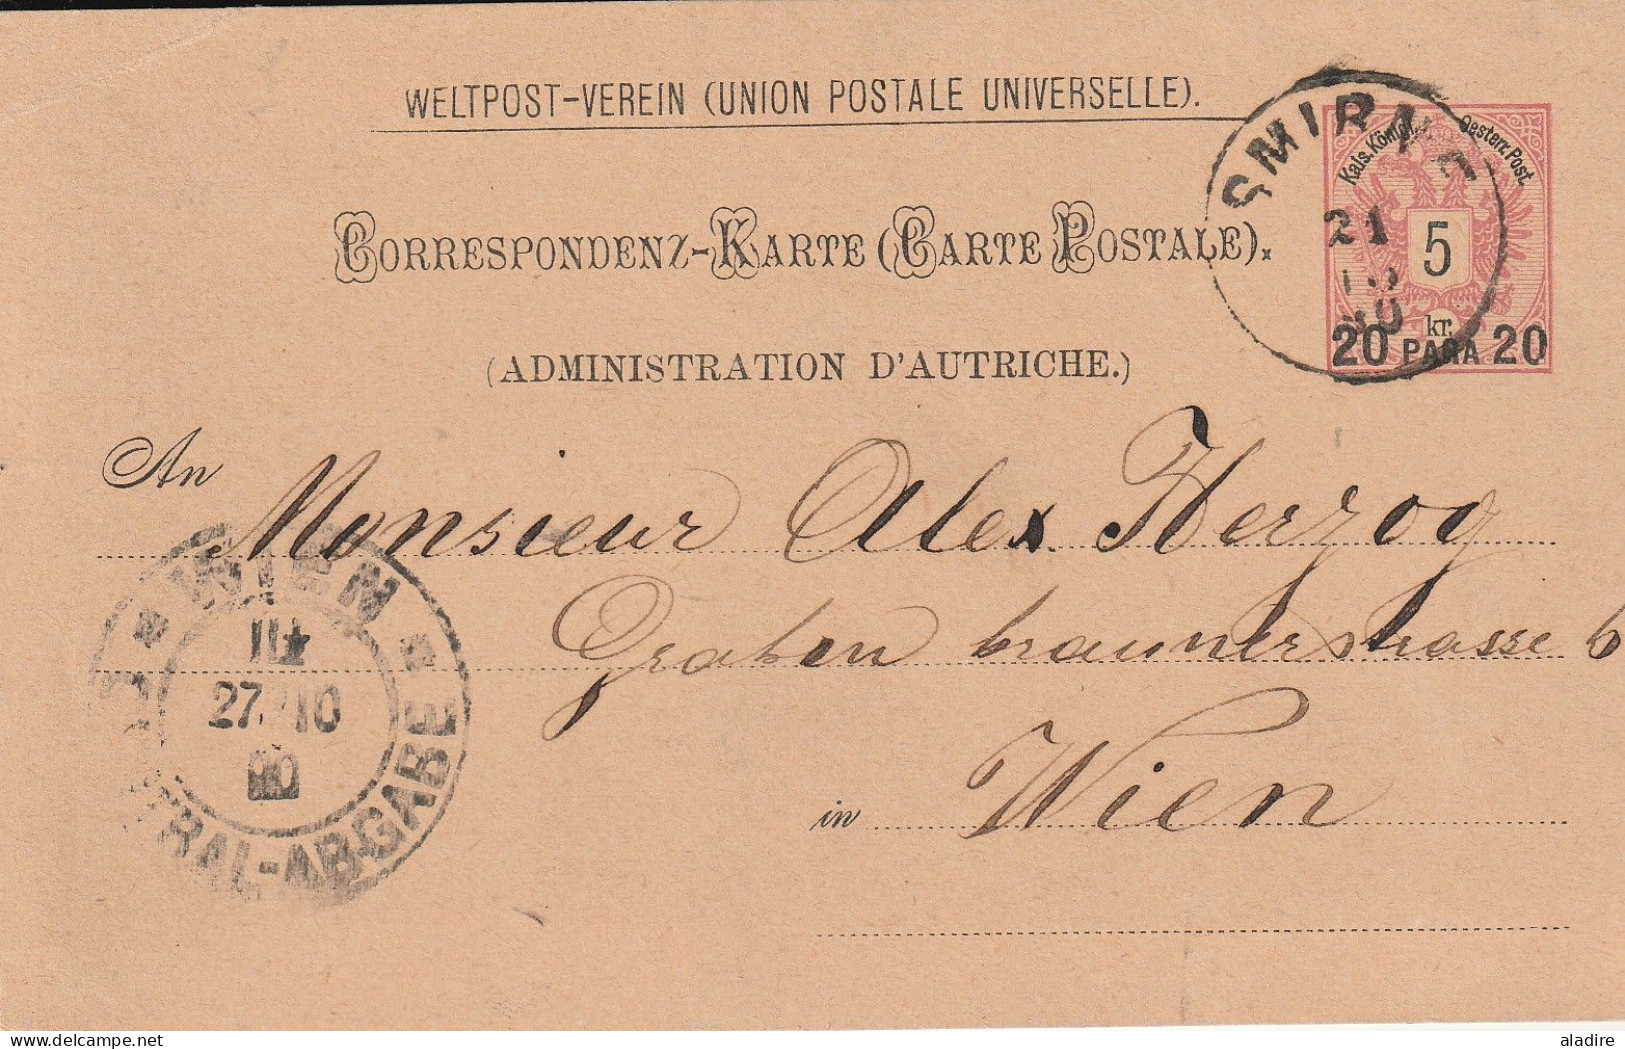 OSTERREICH Autriche Austria  - 1820 / 1927 - a collection of 16 old letters, covers and cards - 32 scans